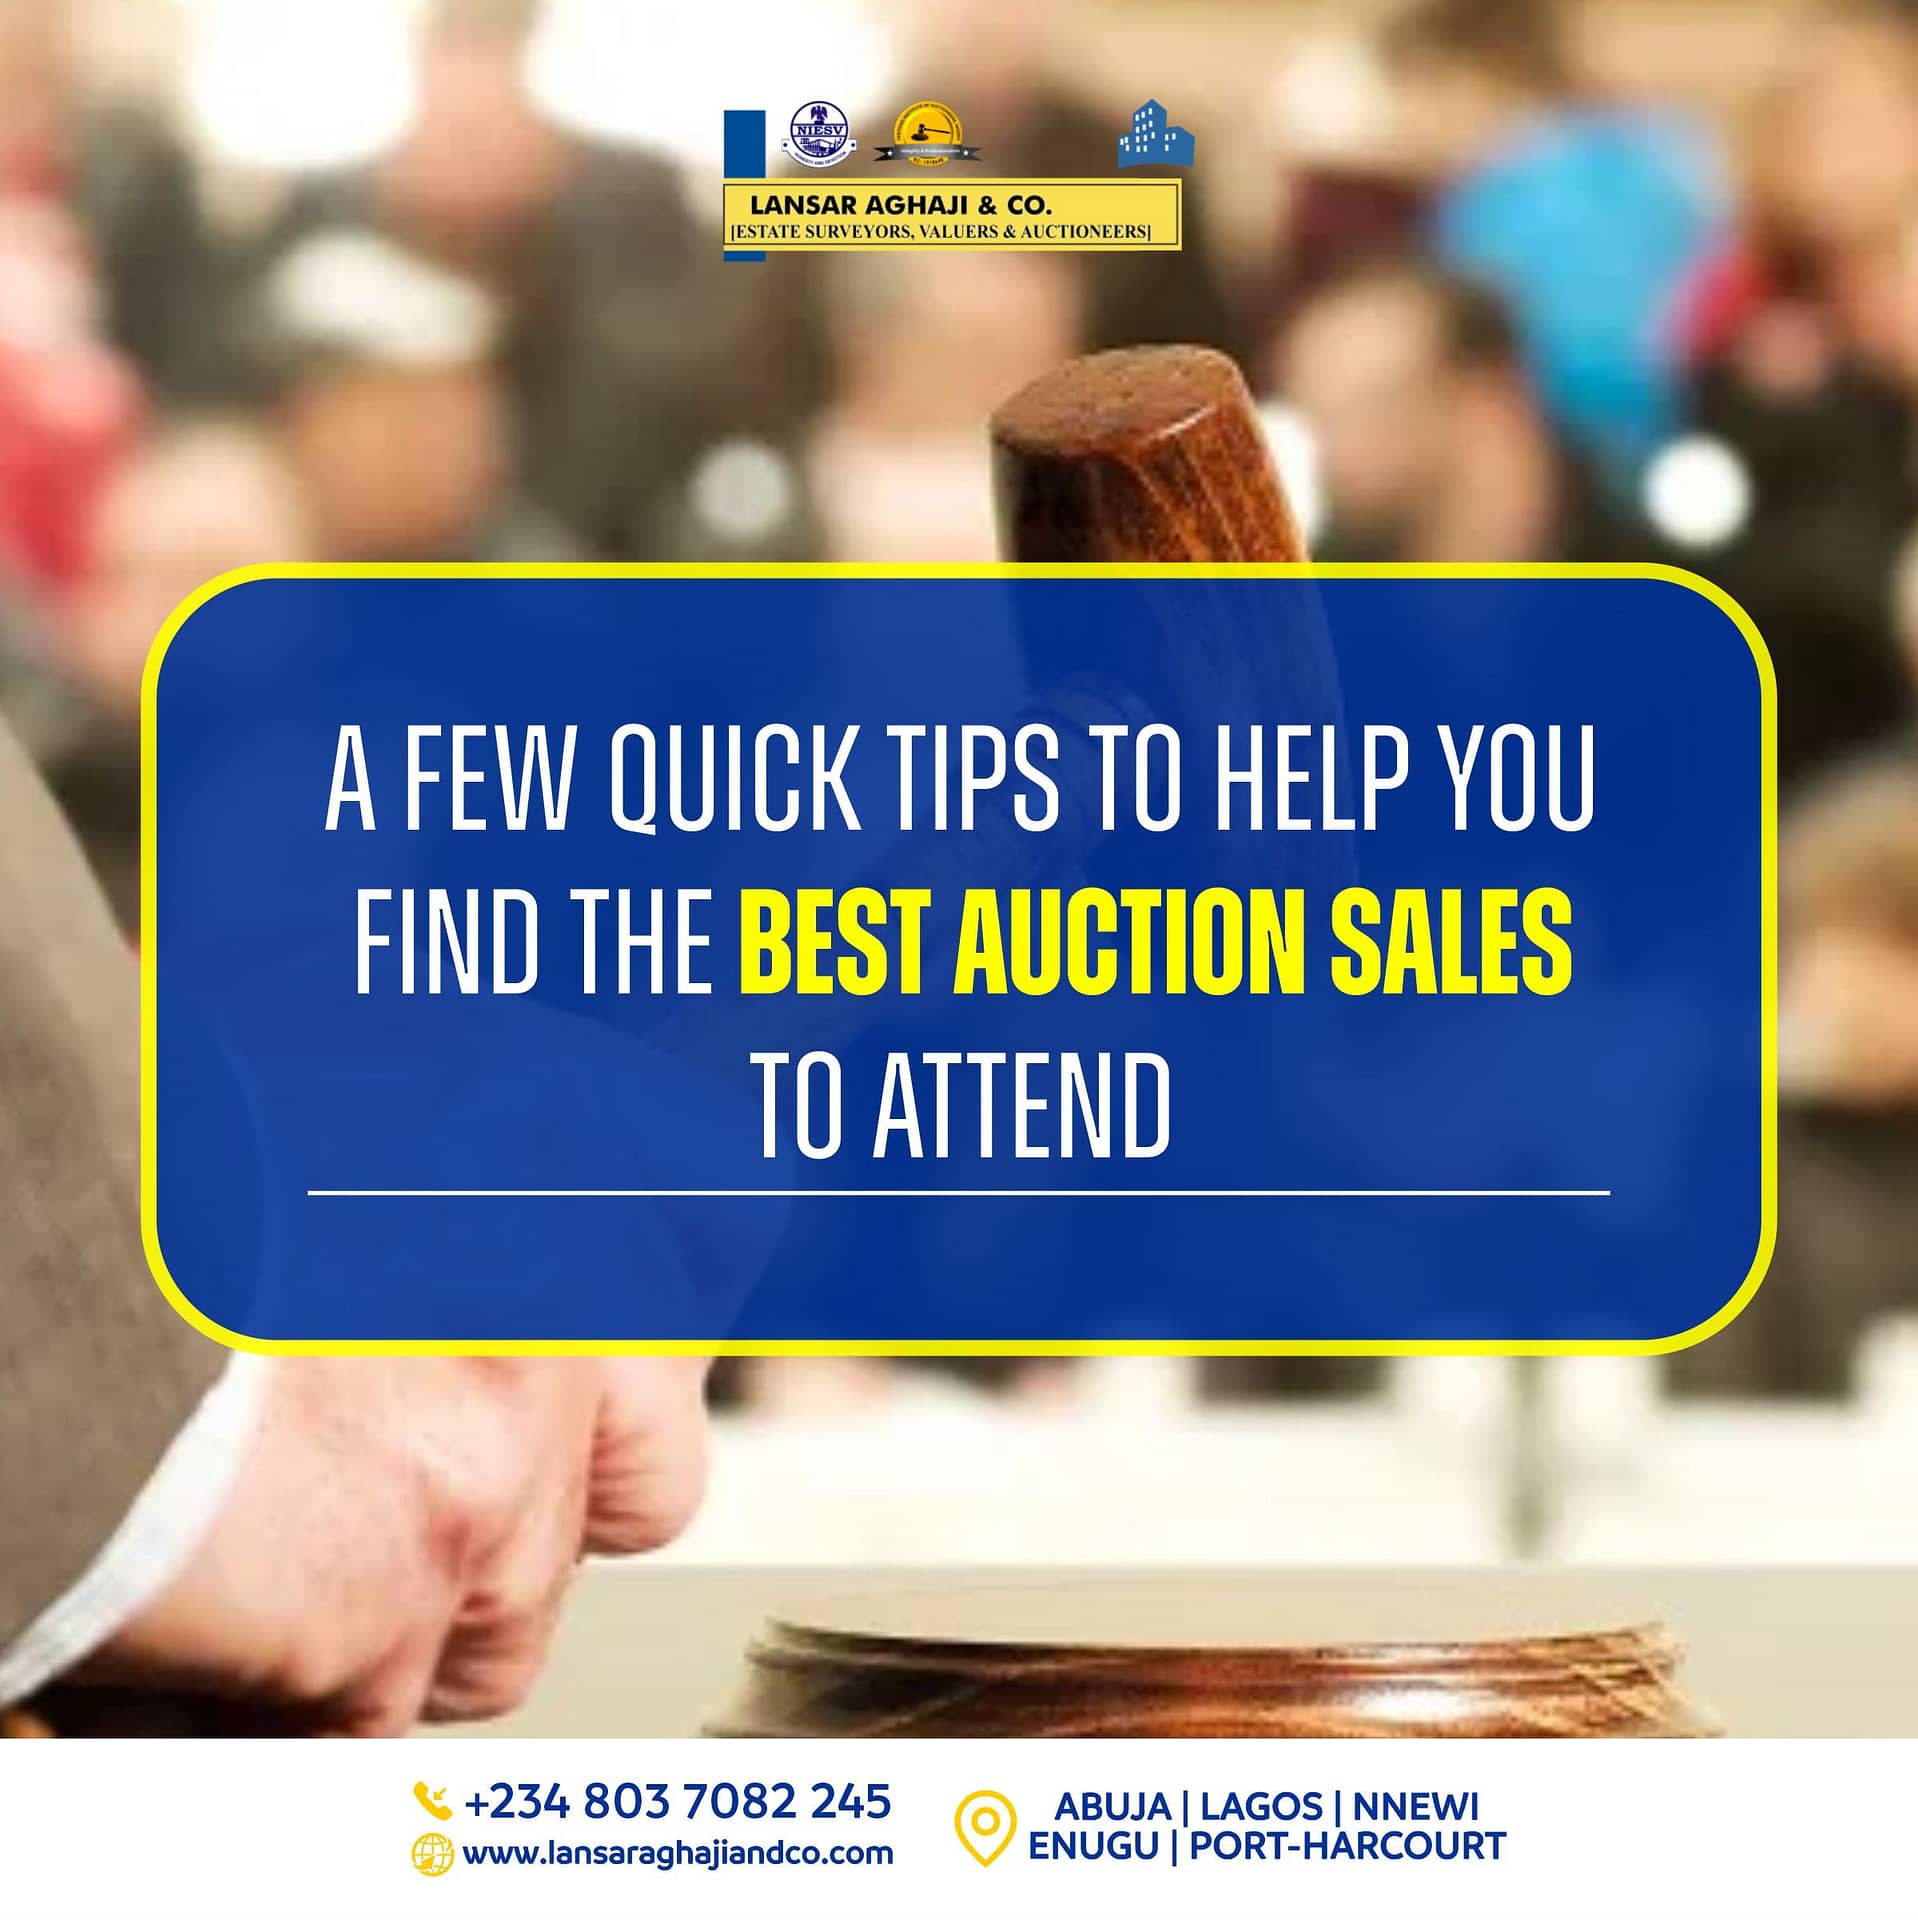 A Few Quick Tips To Help You Find The Best Auction Sales To Attend